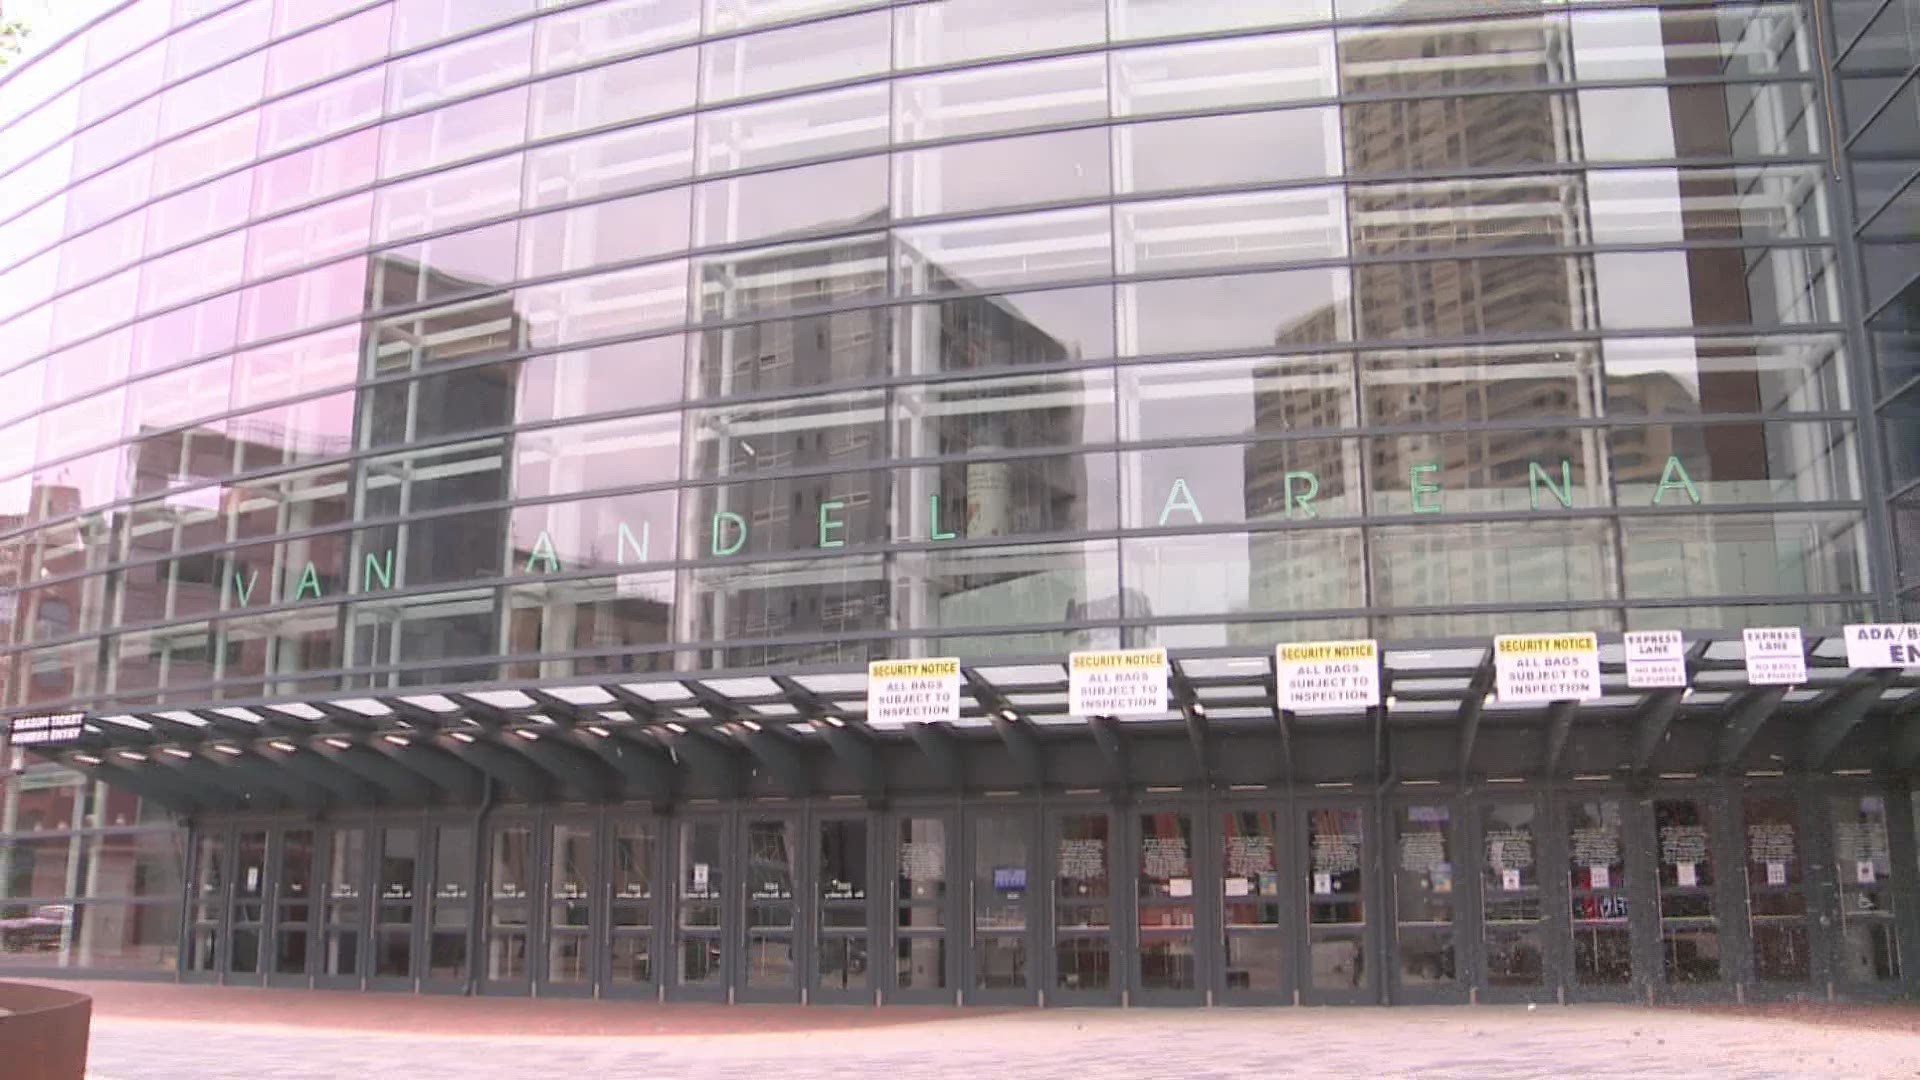 It's been more than a year since a full capacity crowd has cheered on their favorite artist at the Van Andel Arena.